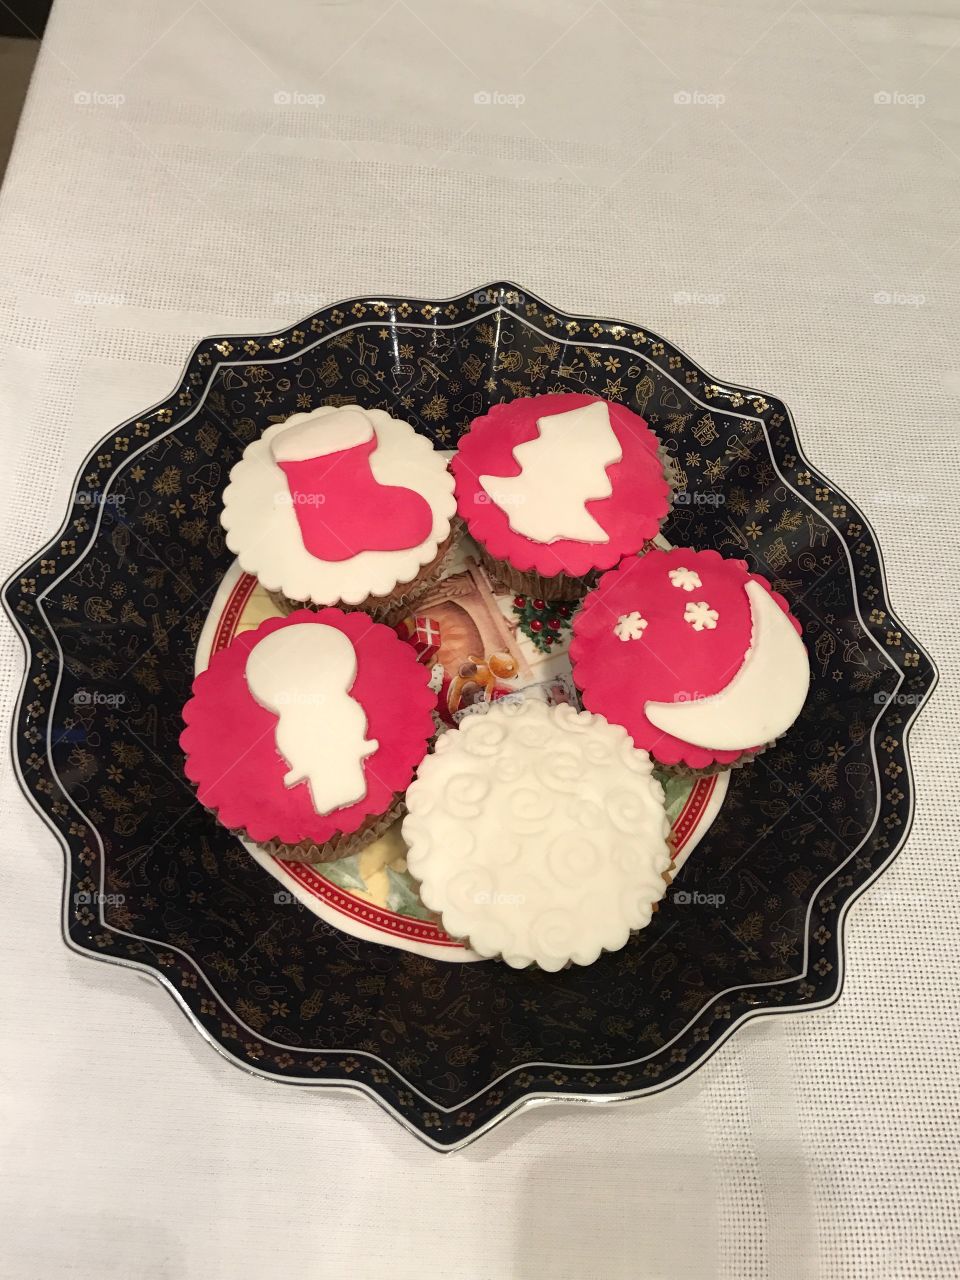 Christmas cupcakes on a plate-red and white